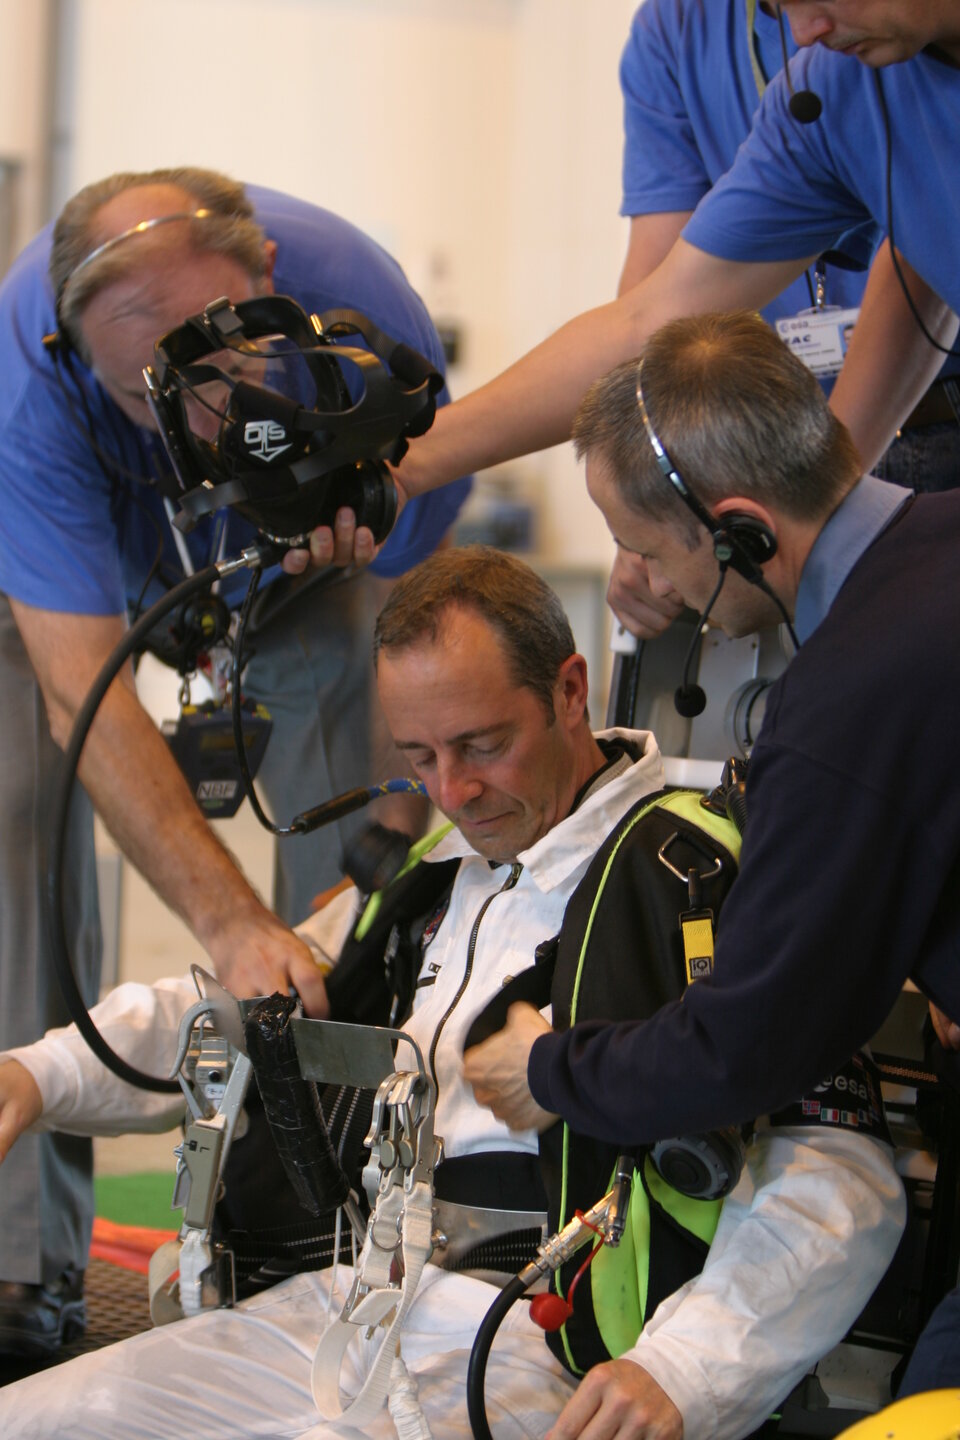 ESA astronaut Jean-François Clervoy prepares to join Eurobot in the EAC pool